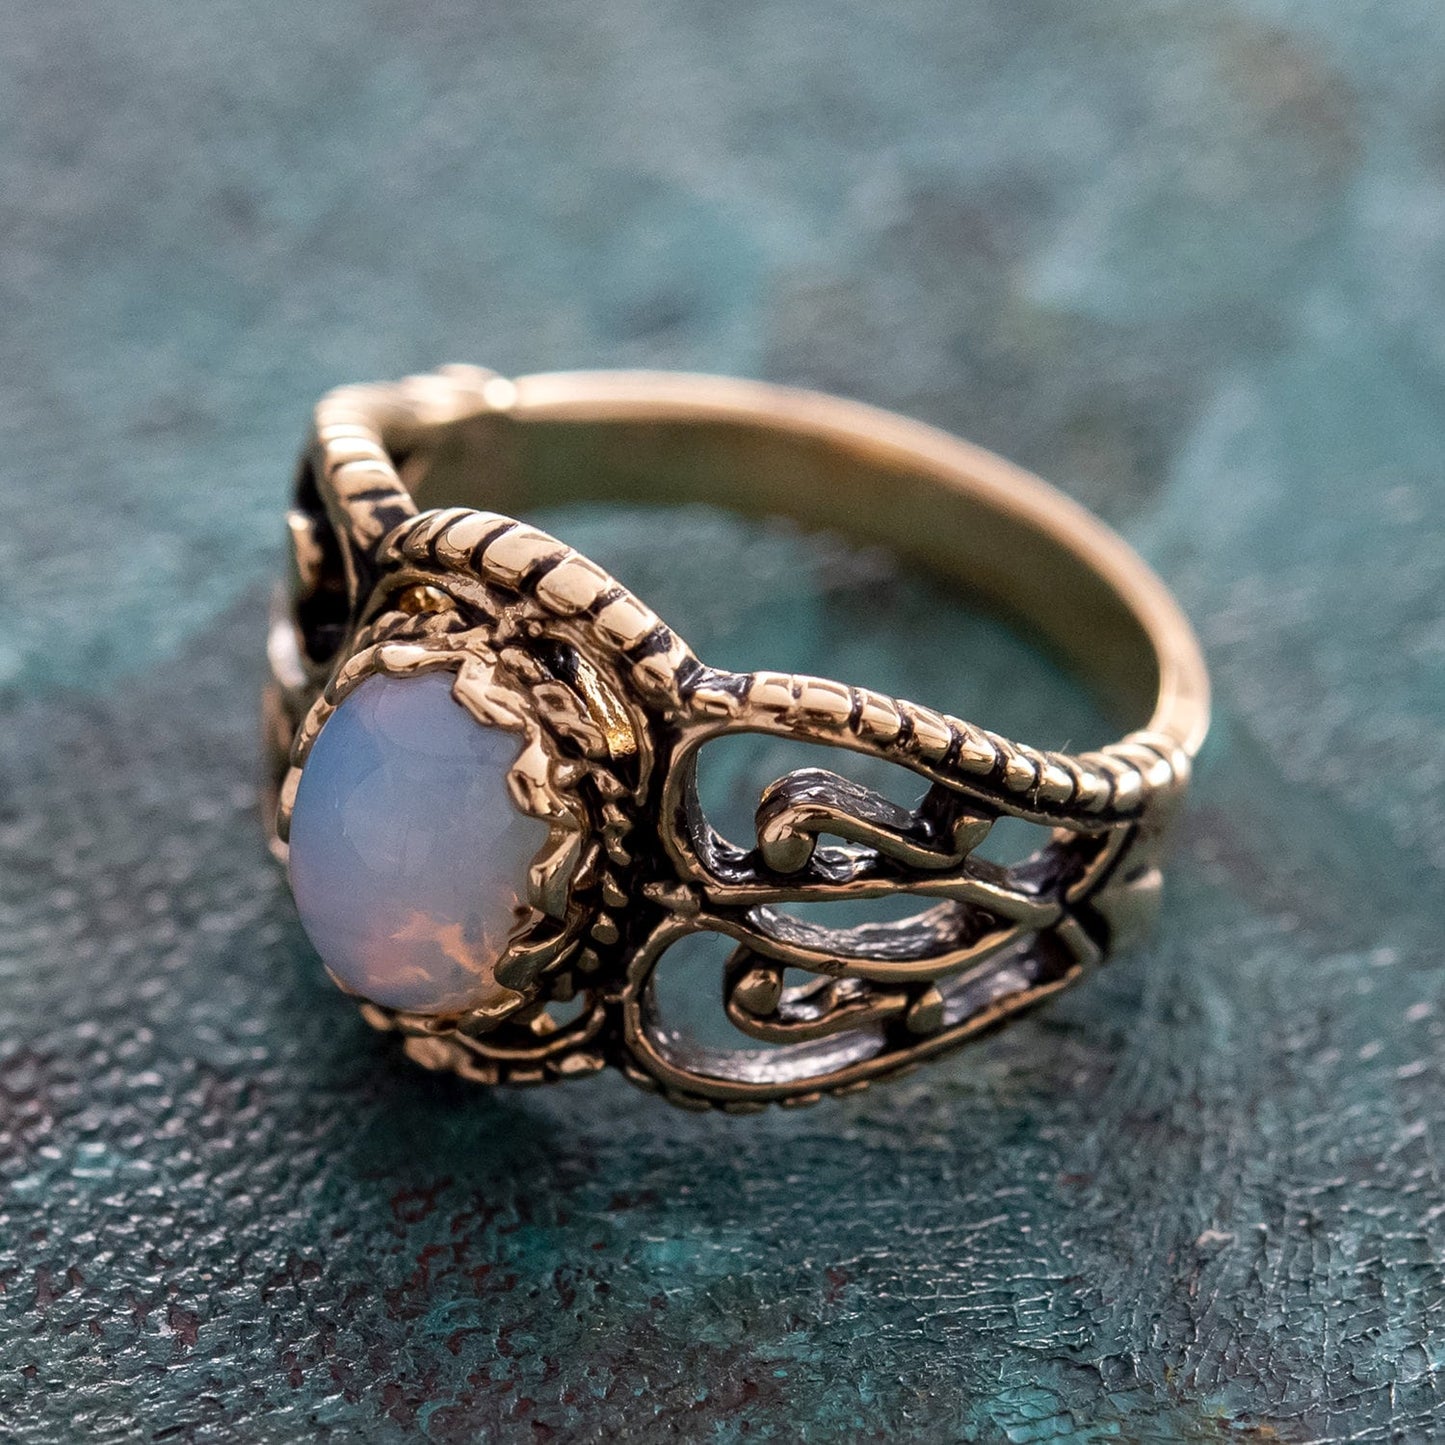 Vintage Ring Pinfire Opal Filigree Ring Antique 18k Gold Womans Jewlery Handmade Size Opals R142 - Limited Stock - Never Worn